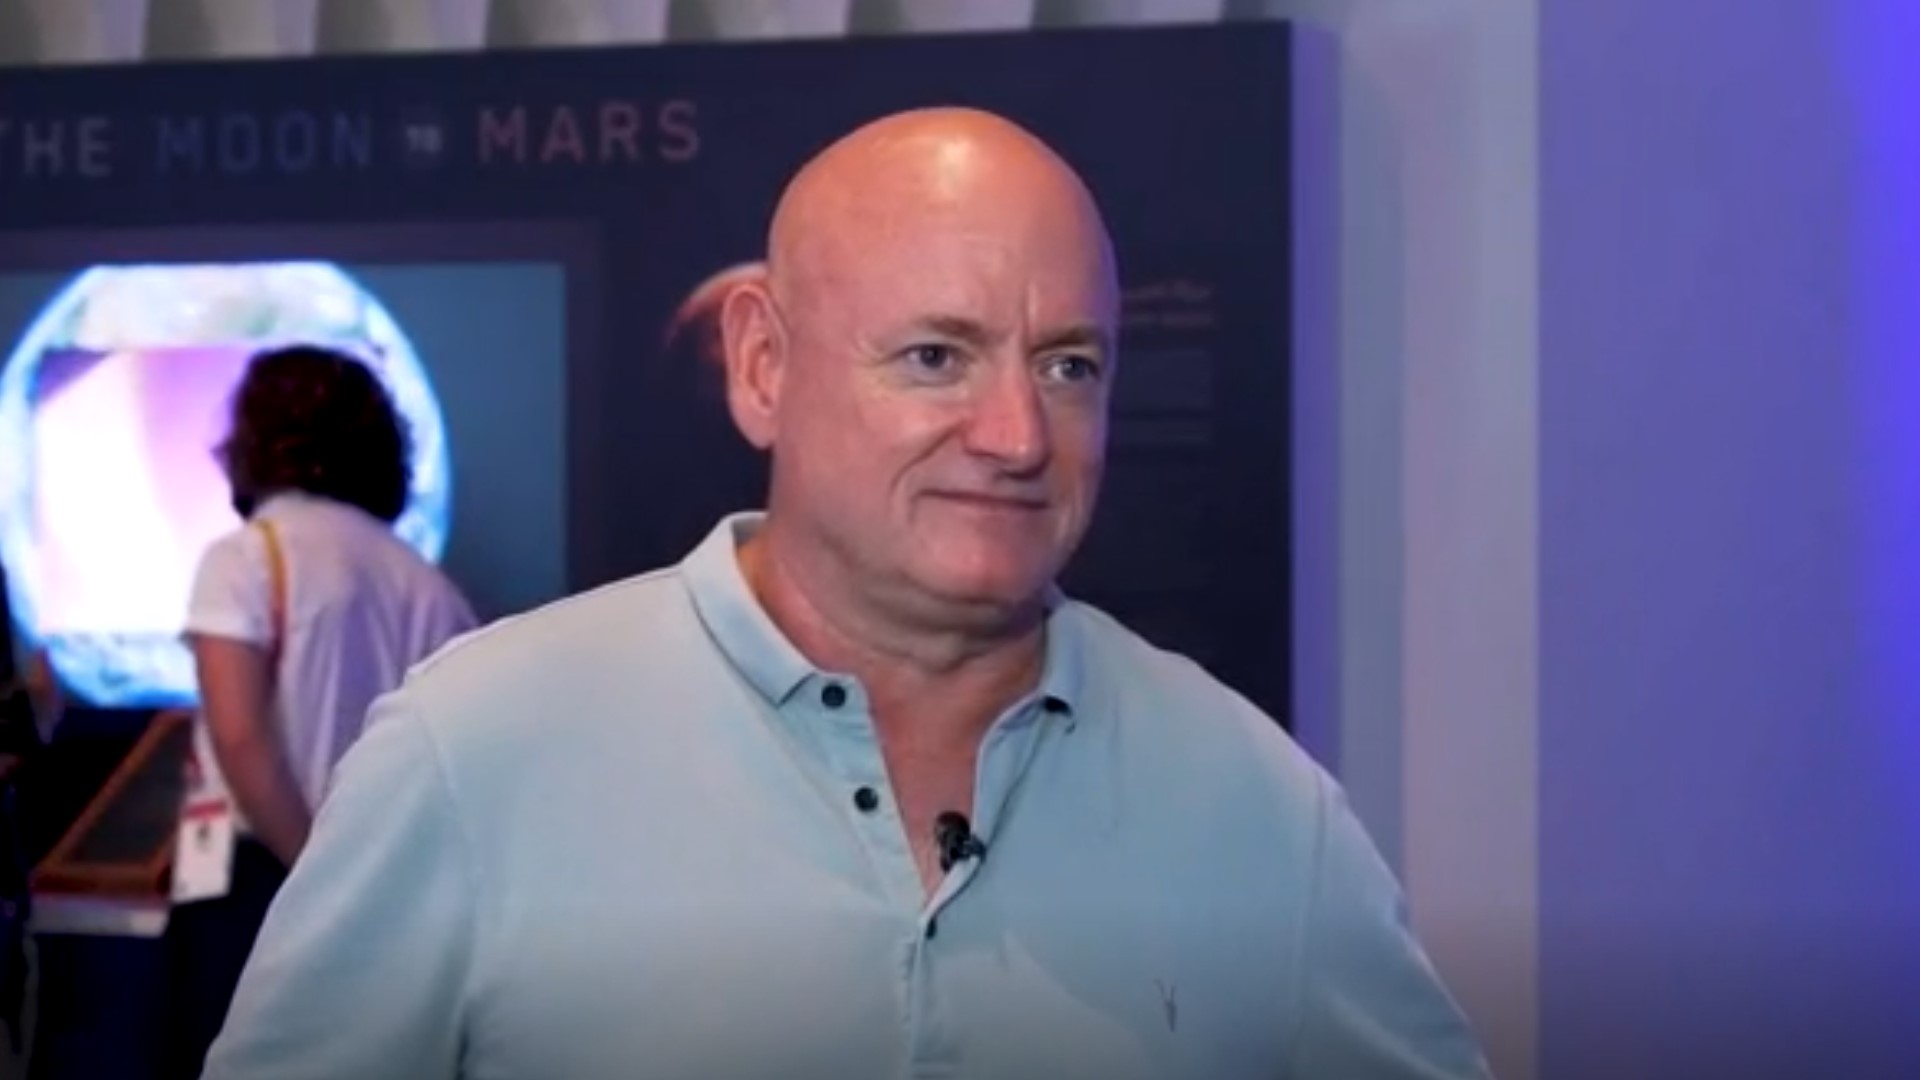 In an interview with CNN, Arizona U.S. Senator Mark Kelly's twin brother, Scott Kelly, said definitively that he does not believe in UFOs or aliens.